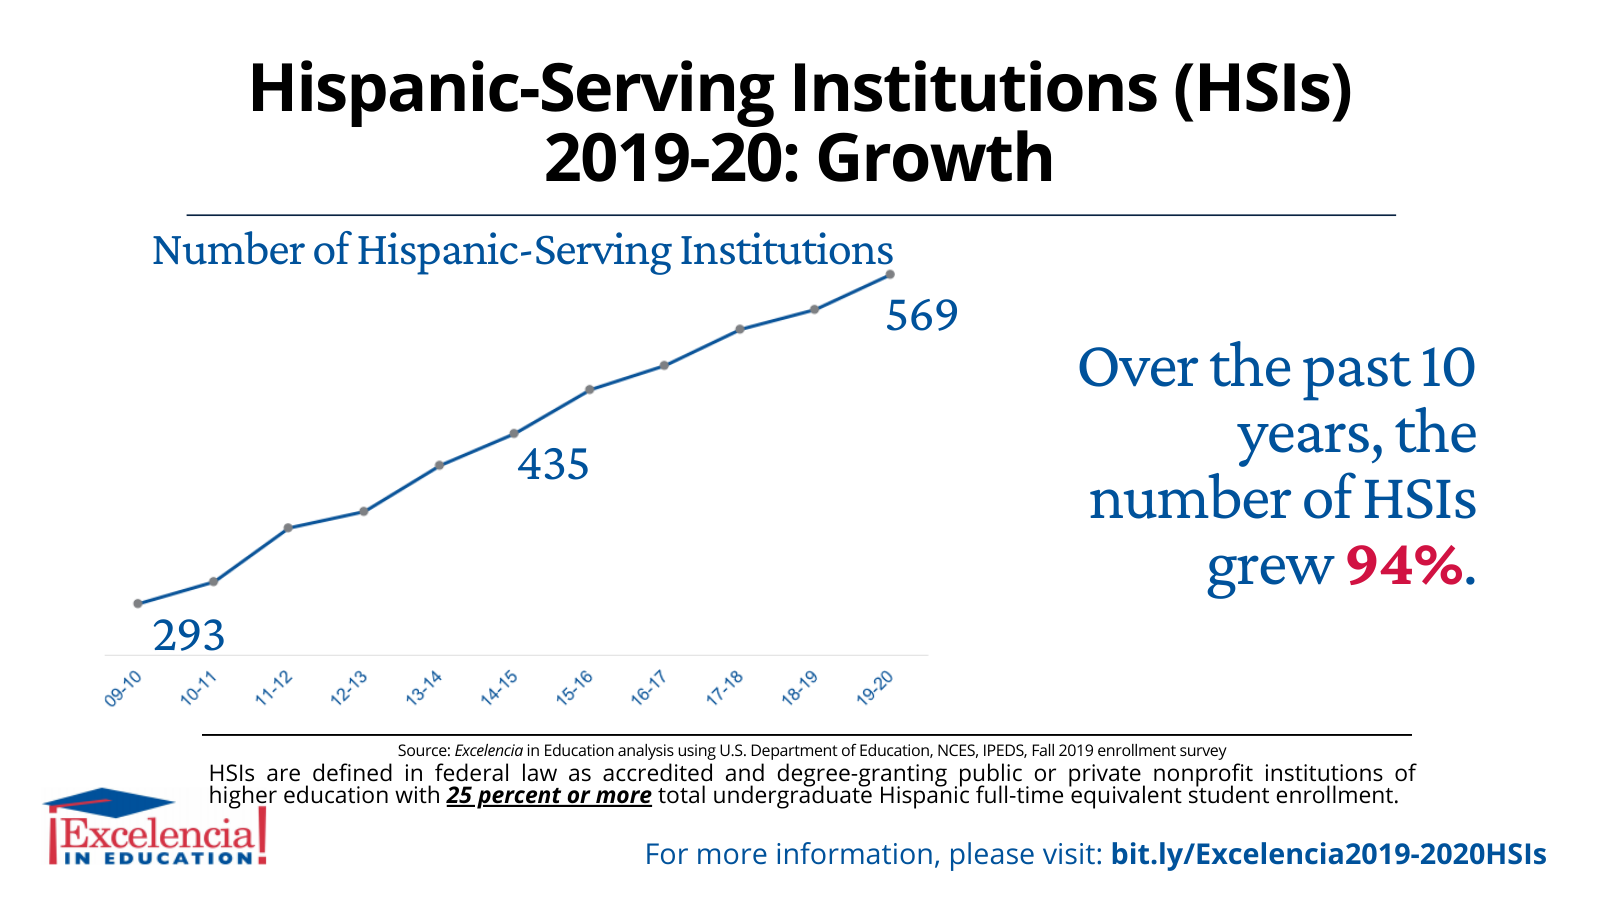 Infographic-Hispanic-Serving Institutions (HSIs) 2019-2020: Growth